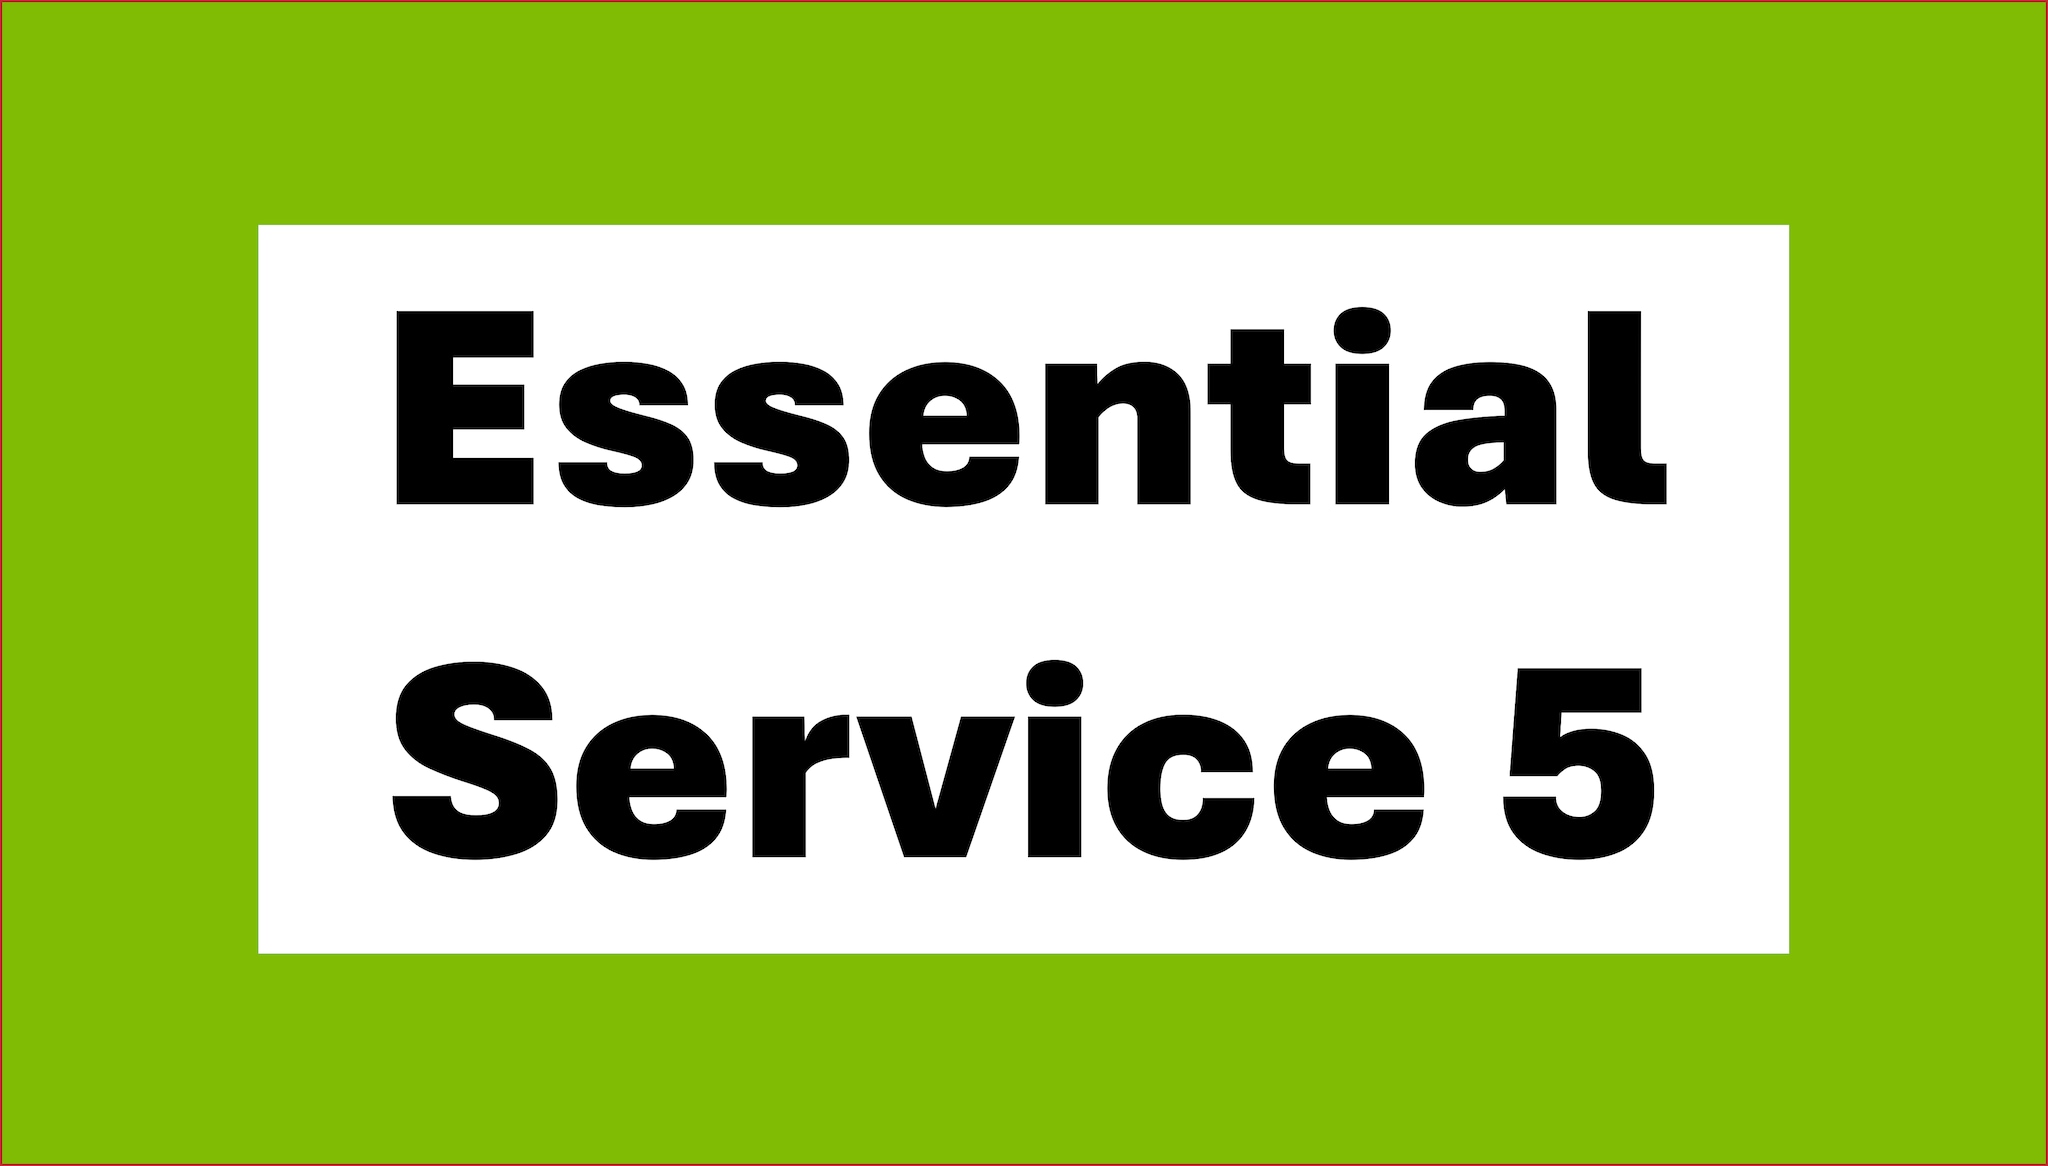 Light green graphic with black text in white box reading Essential Service 5